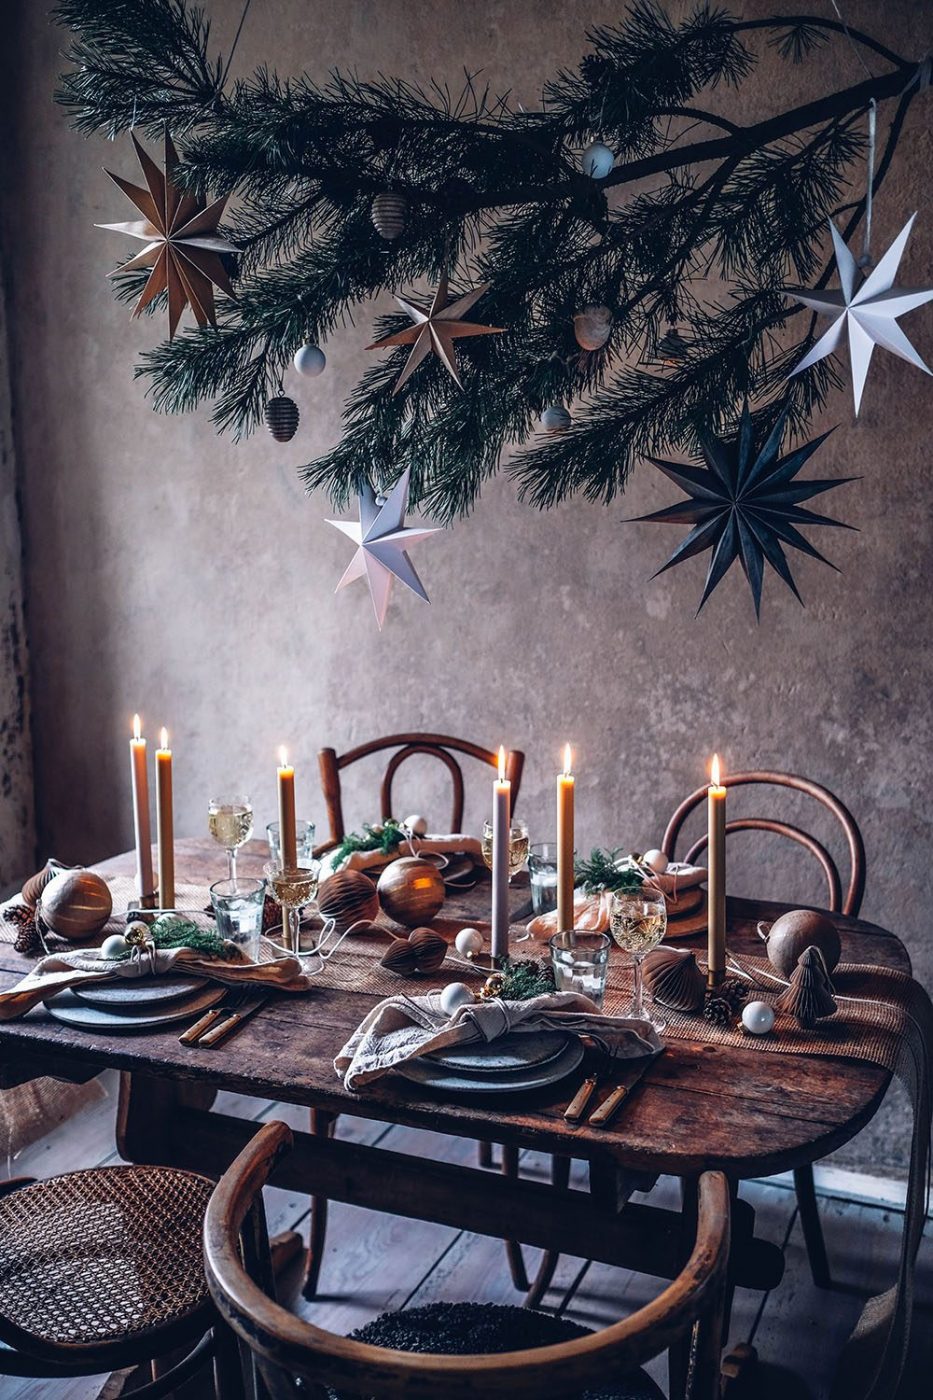 Image for A Simple Christmas Table Setting